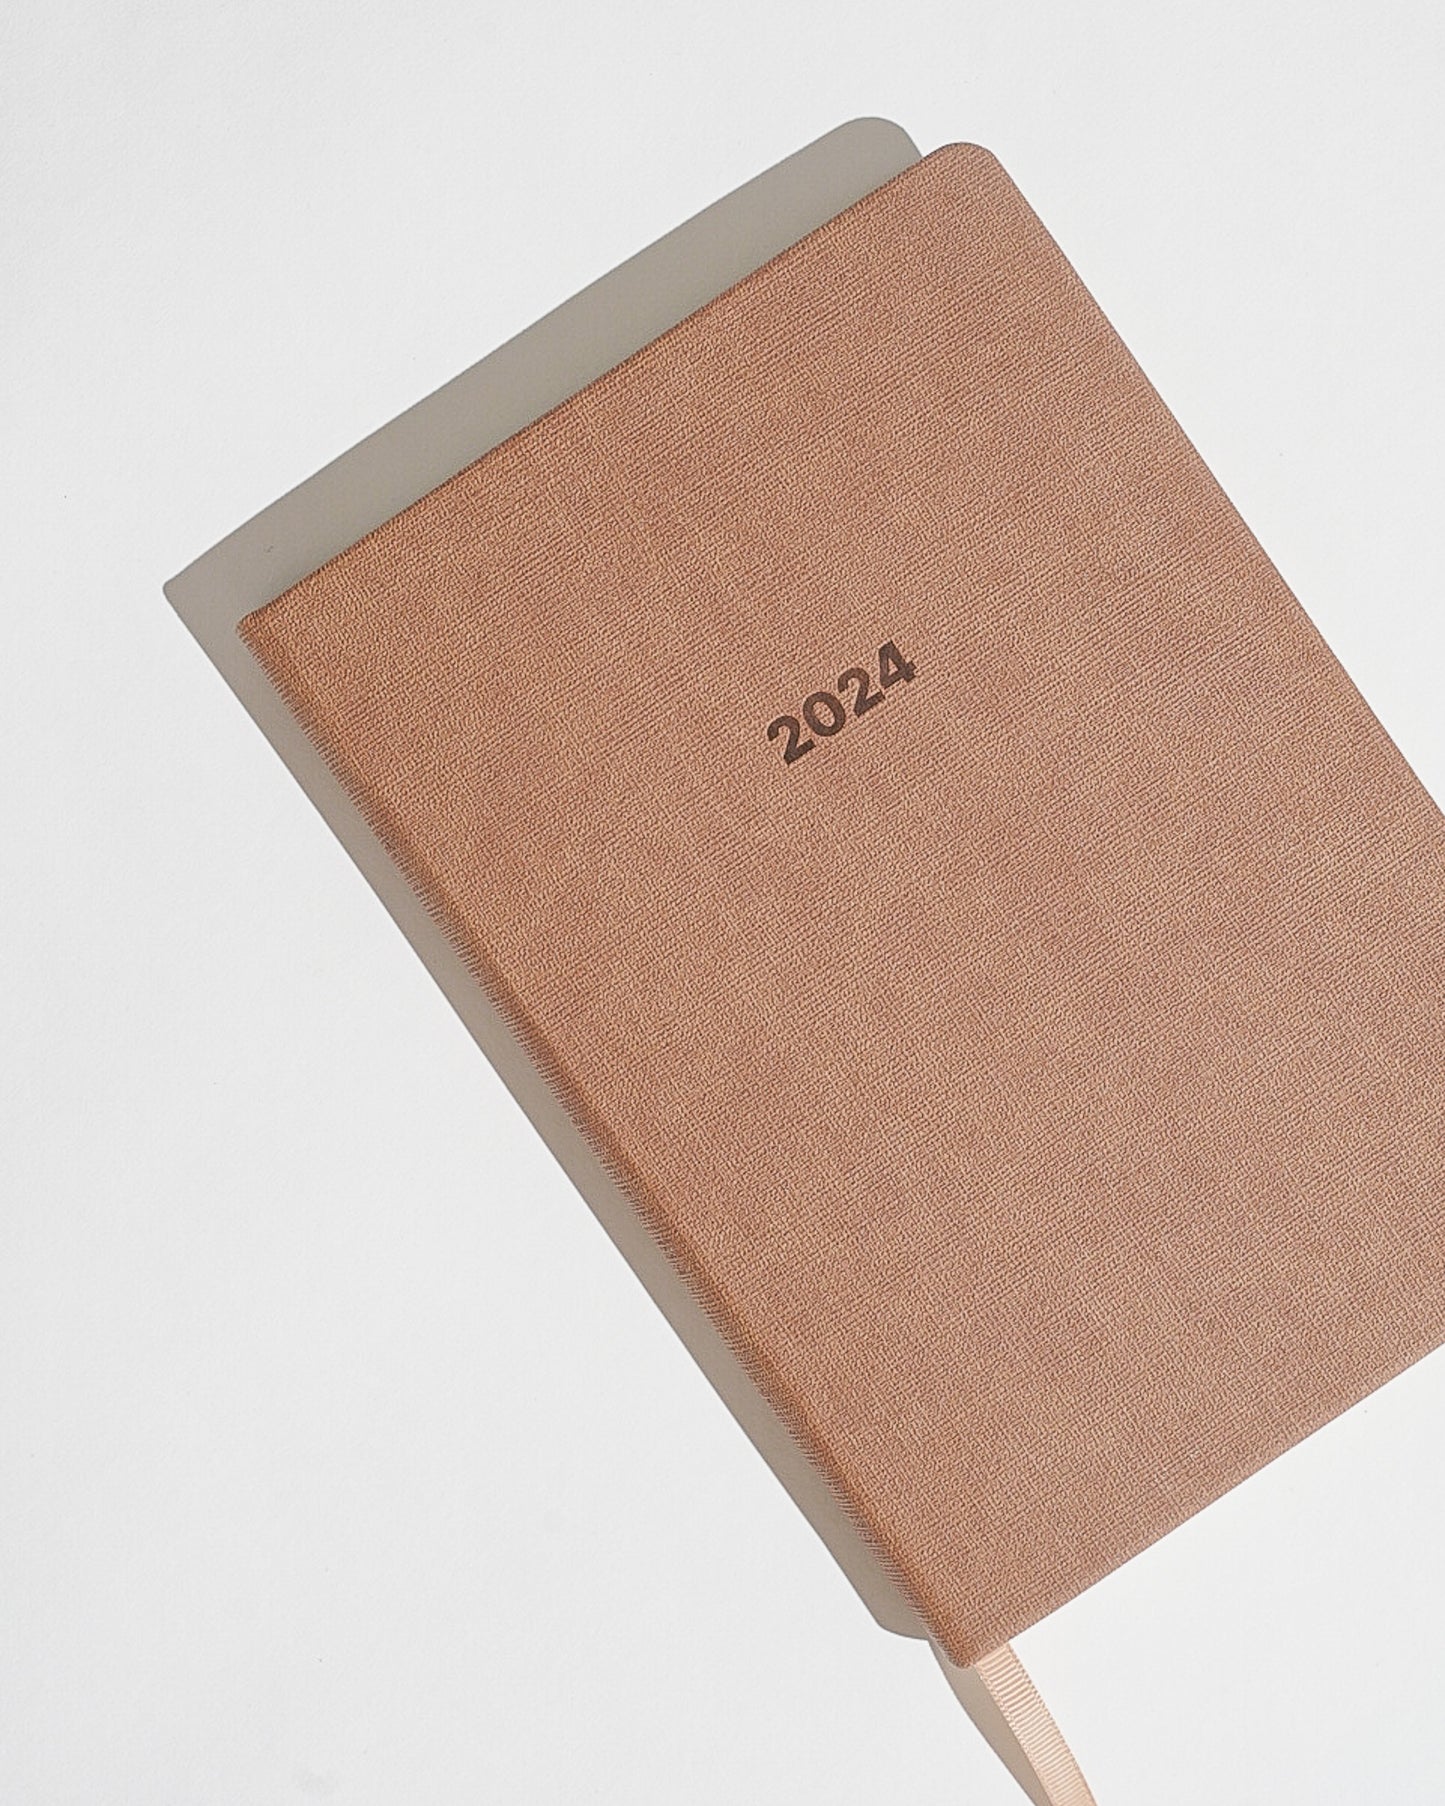 Dated 2024 Planner in Tan